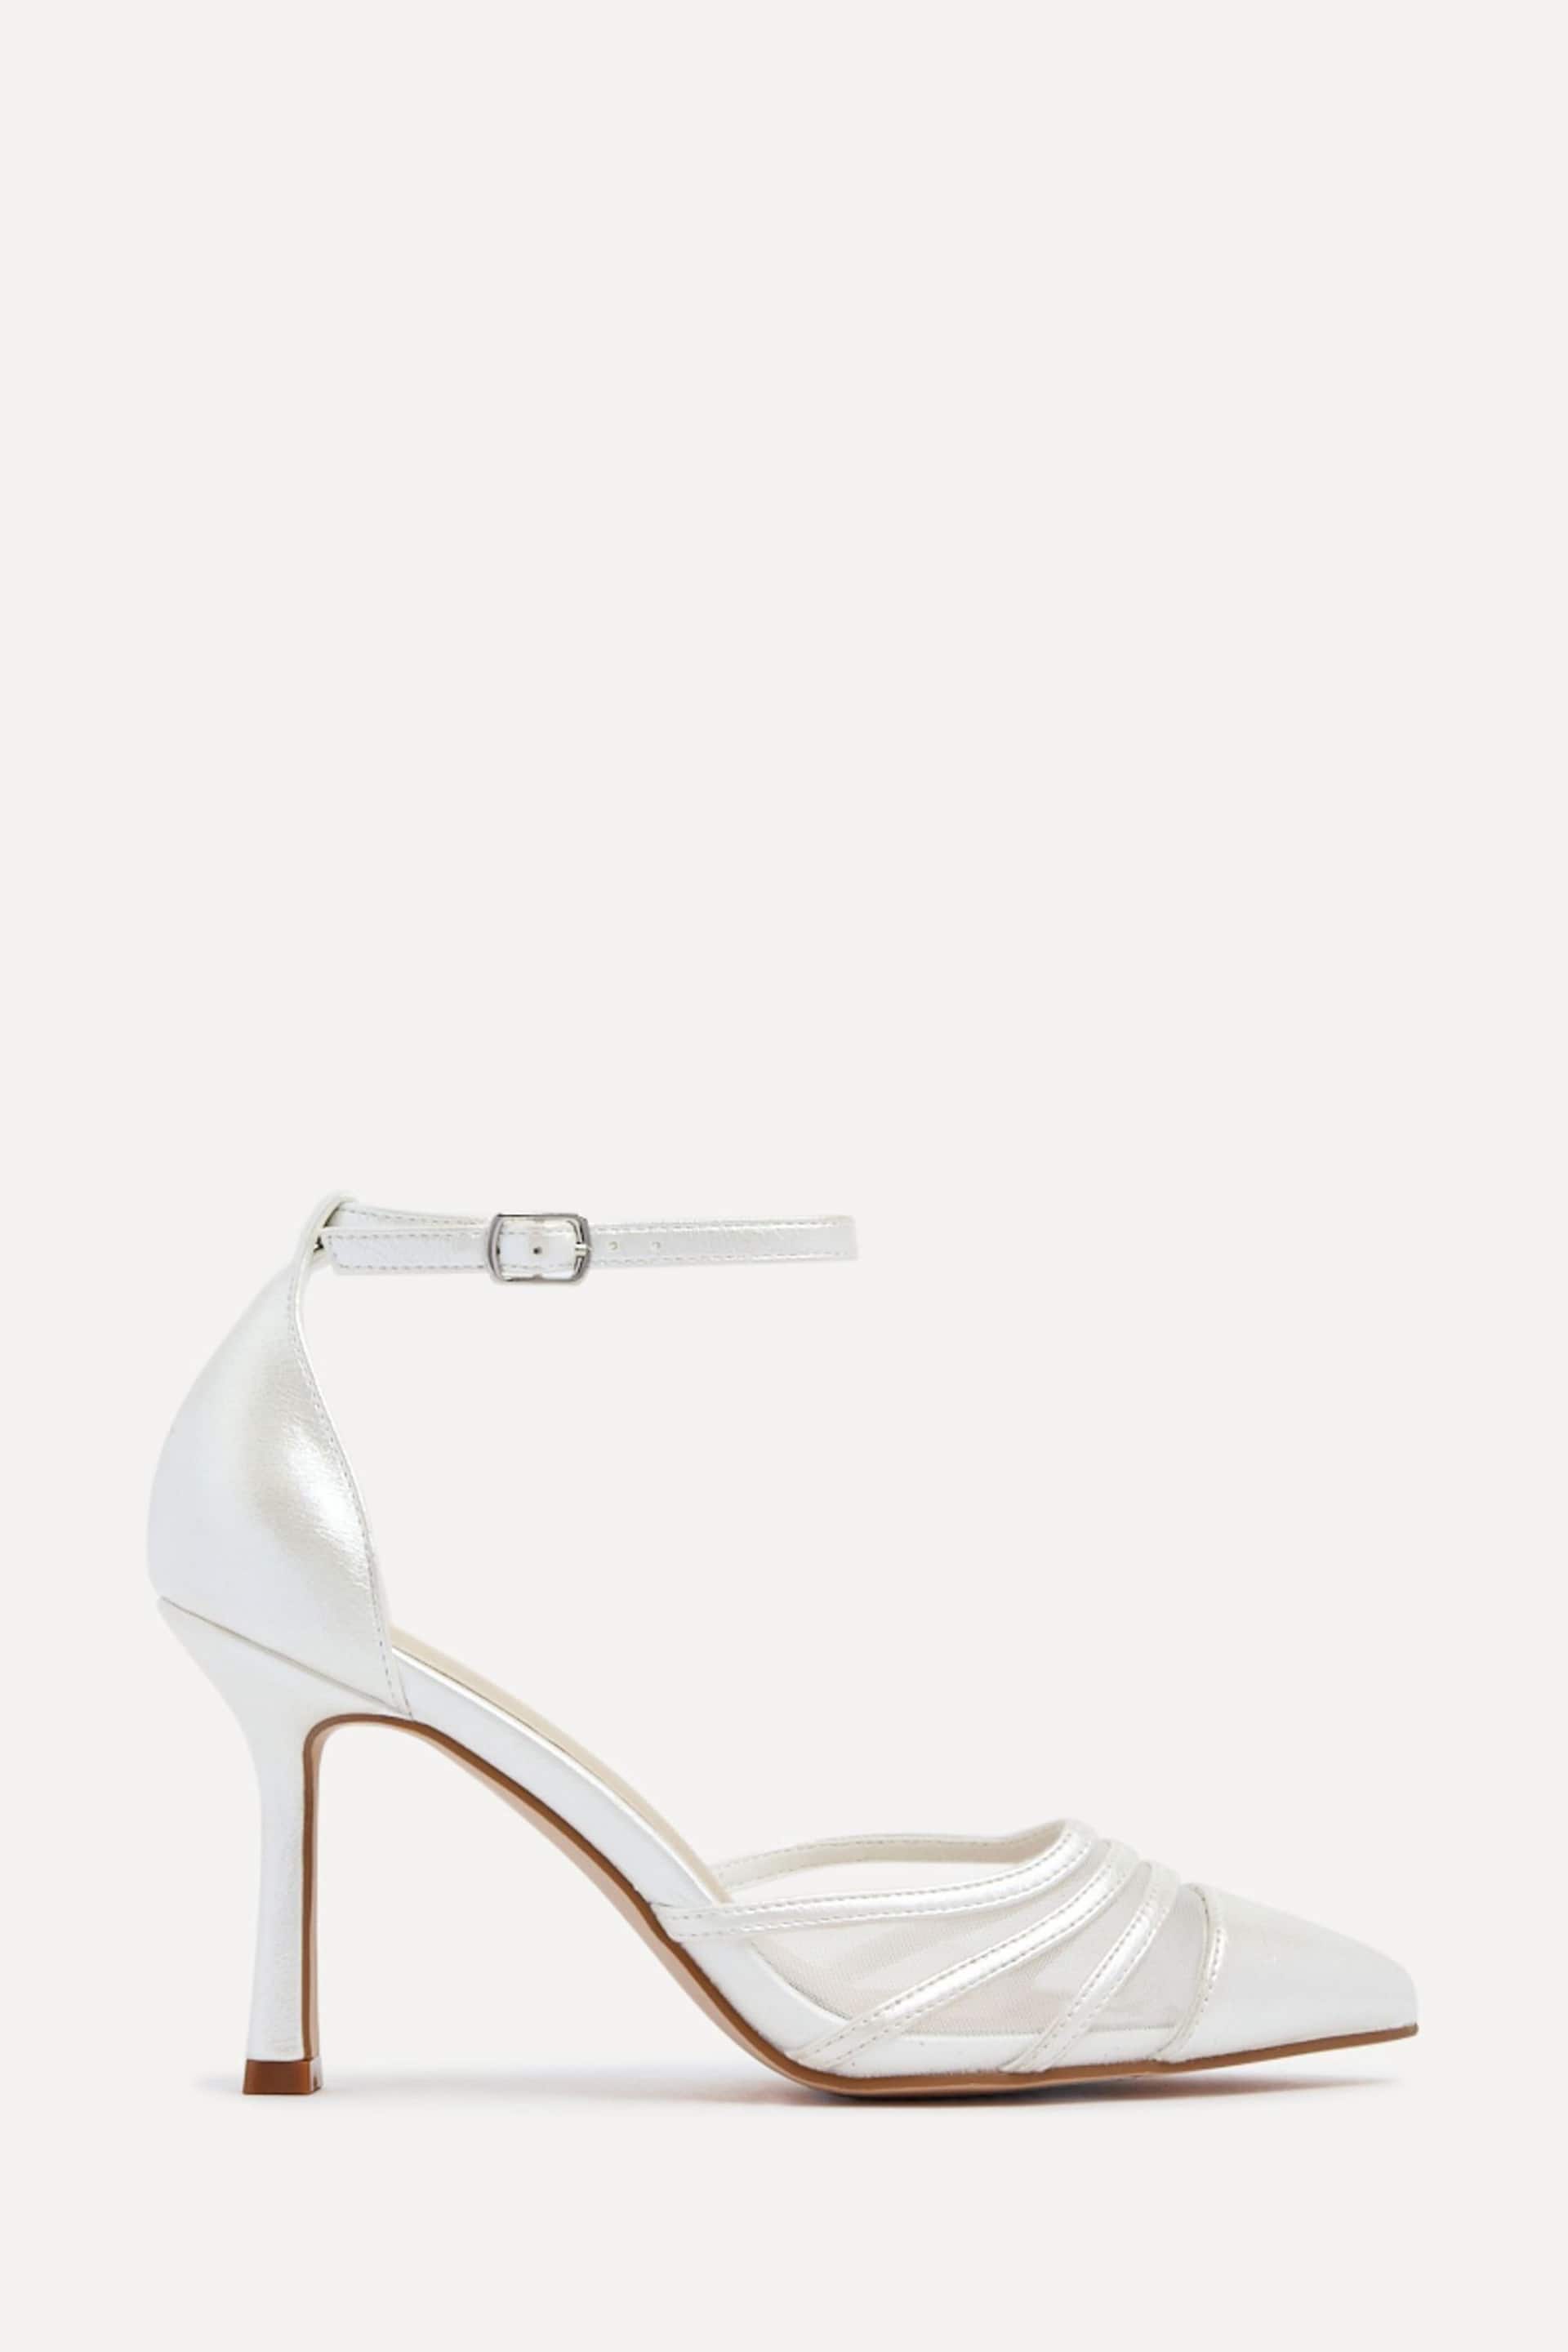 Linzi Natural Rosalind Mesh Court Heels With Ankle Strap - Image 2 of 5